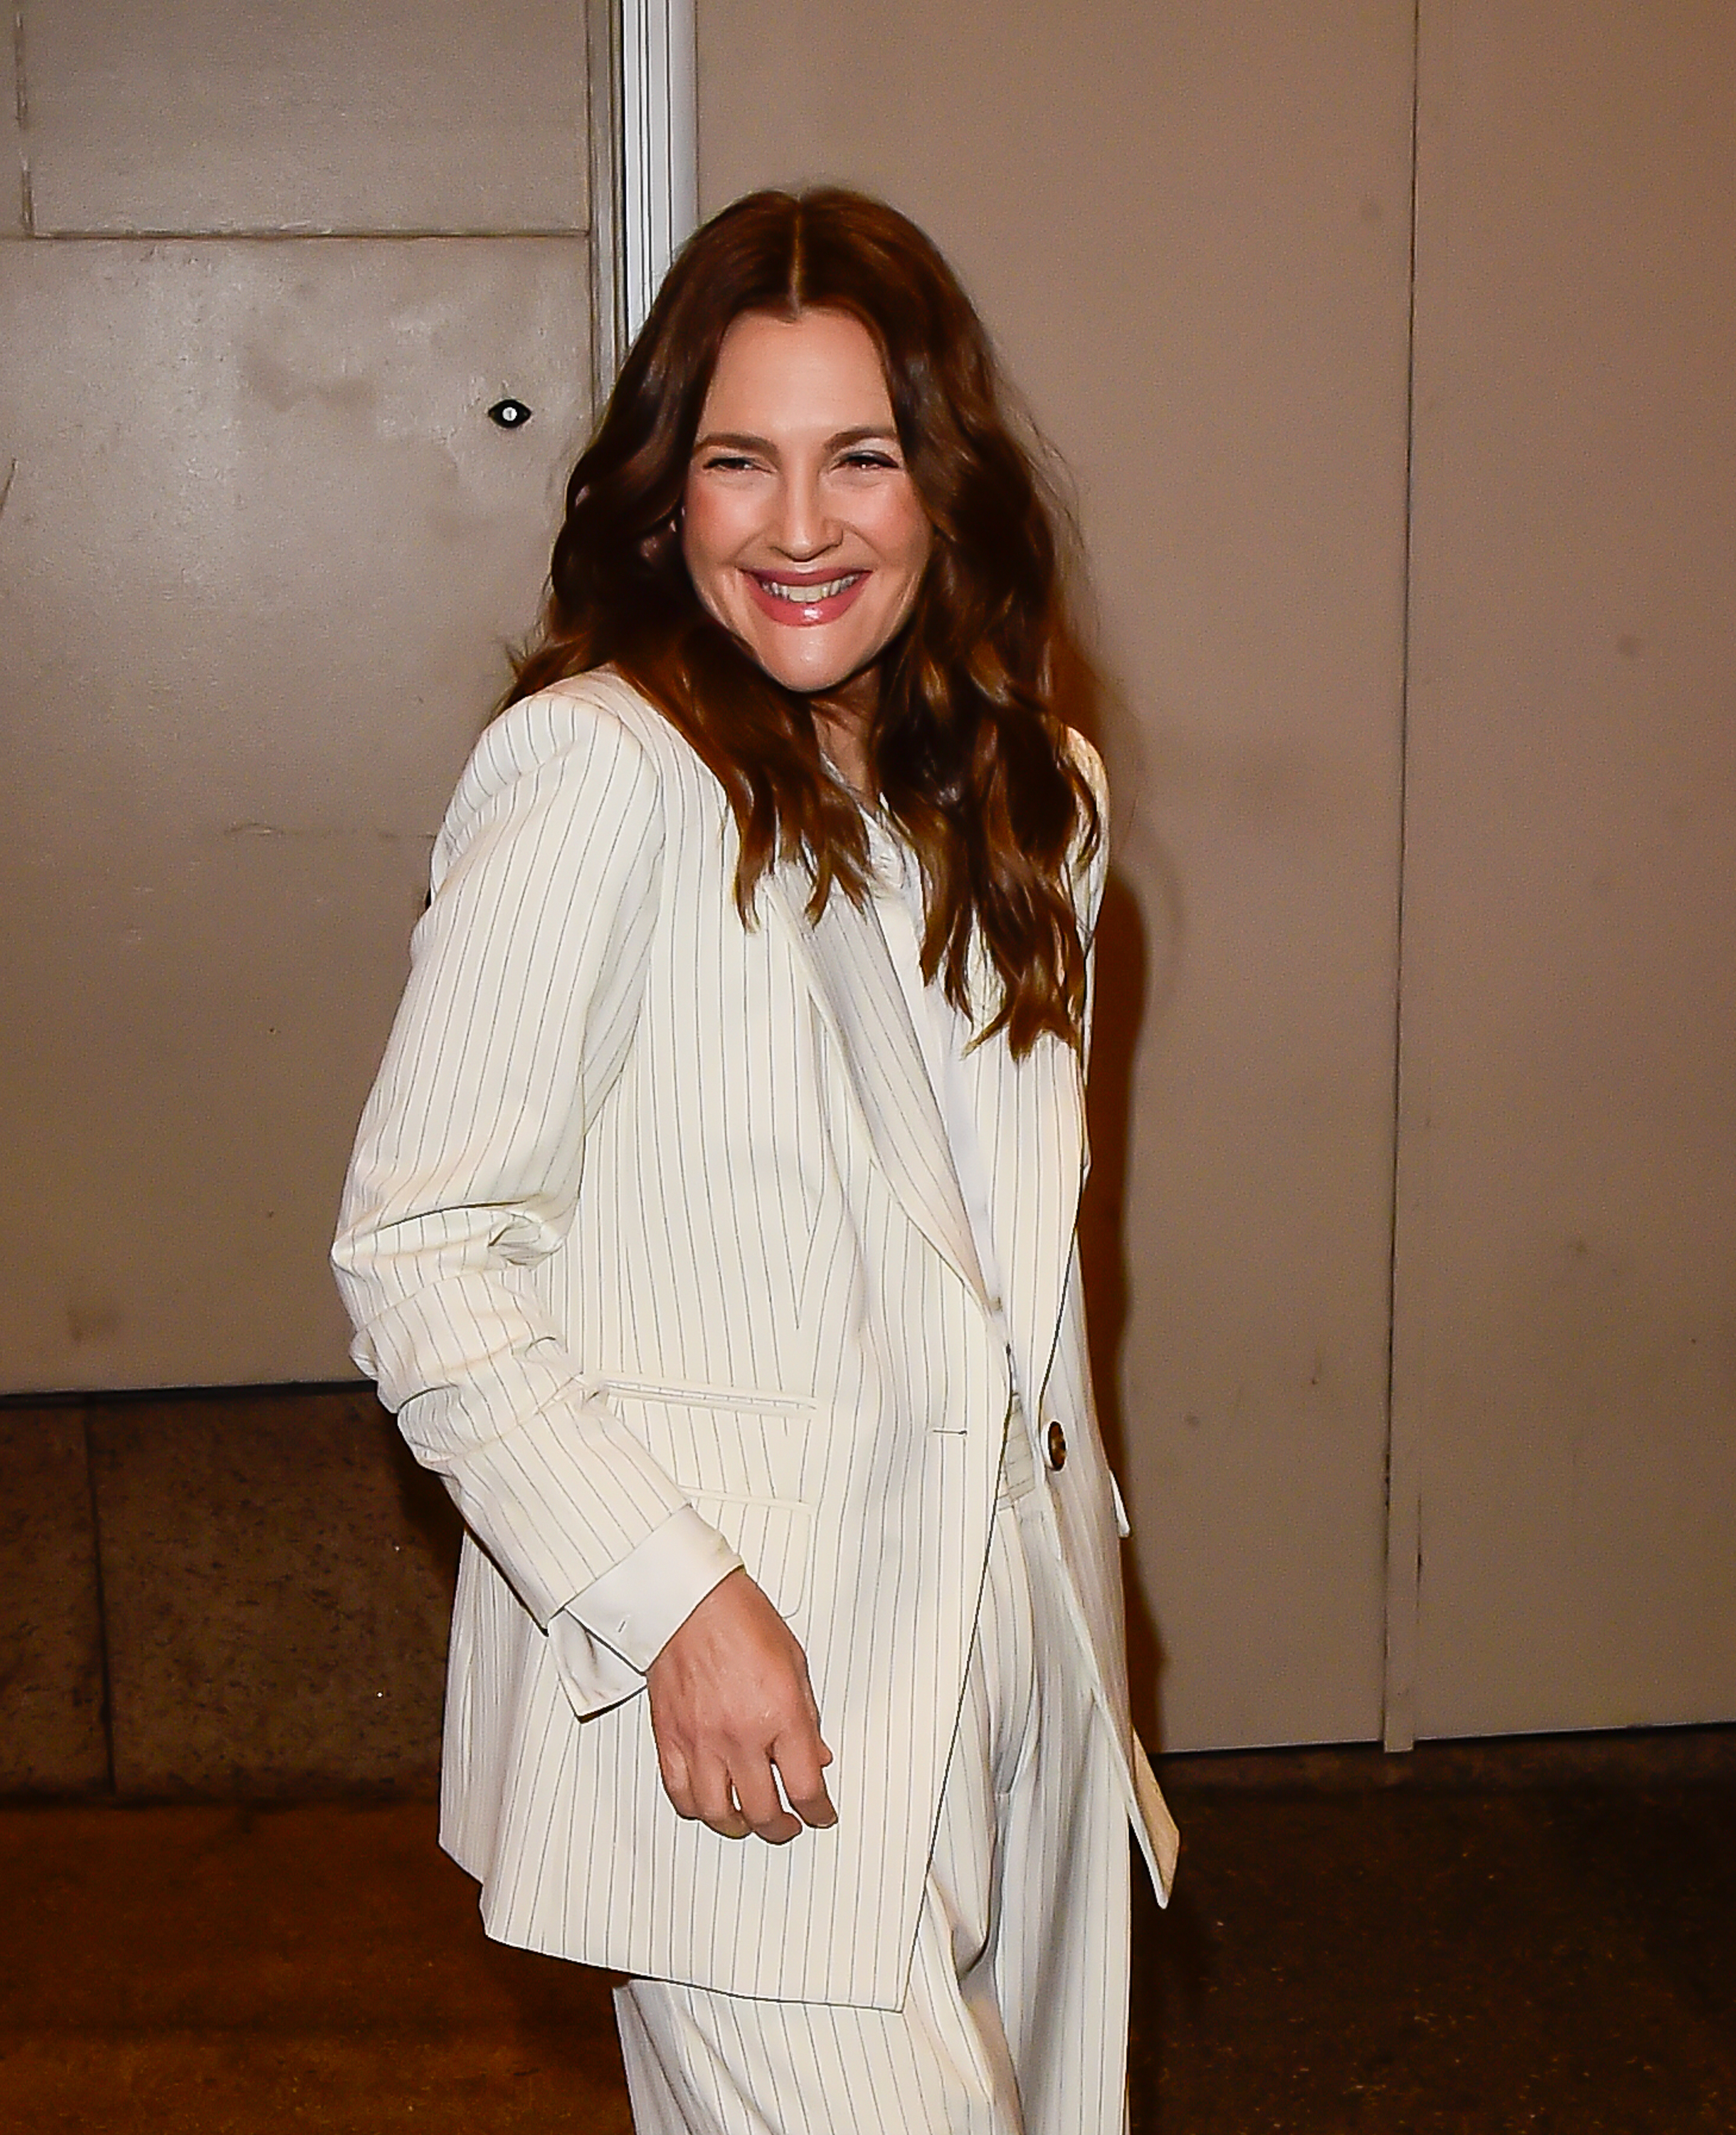 Drew Barrymore smiling and posing in a pinstriped suit